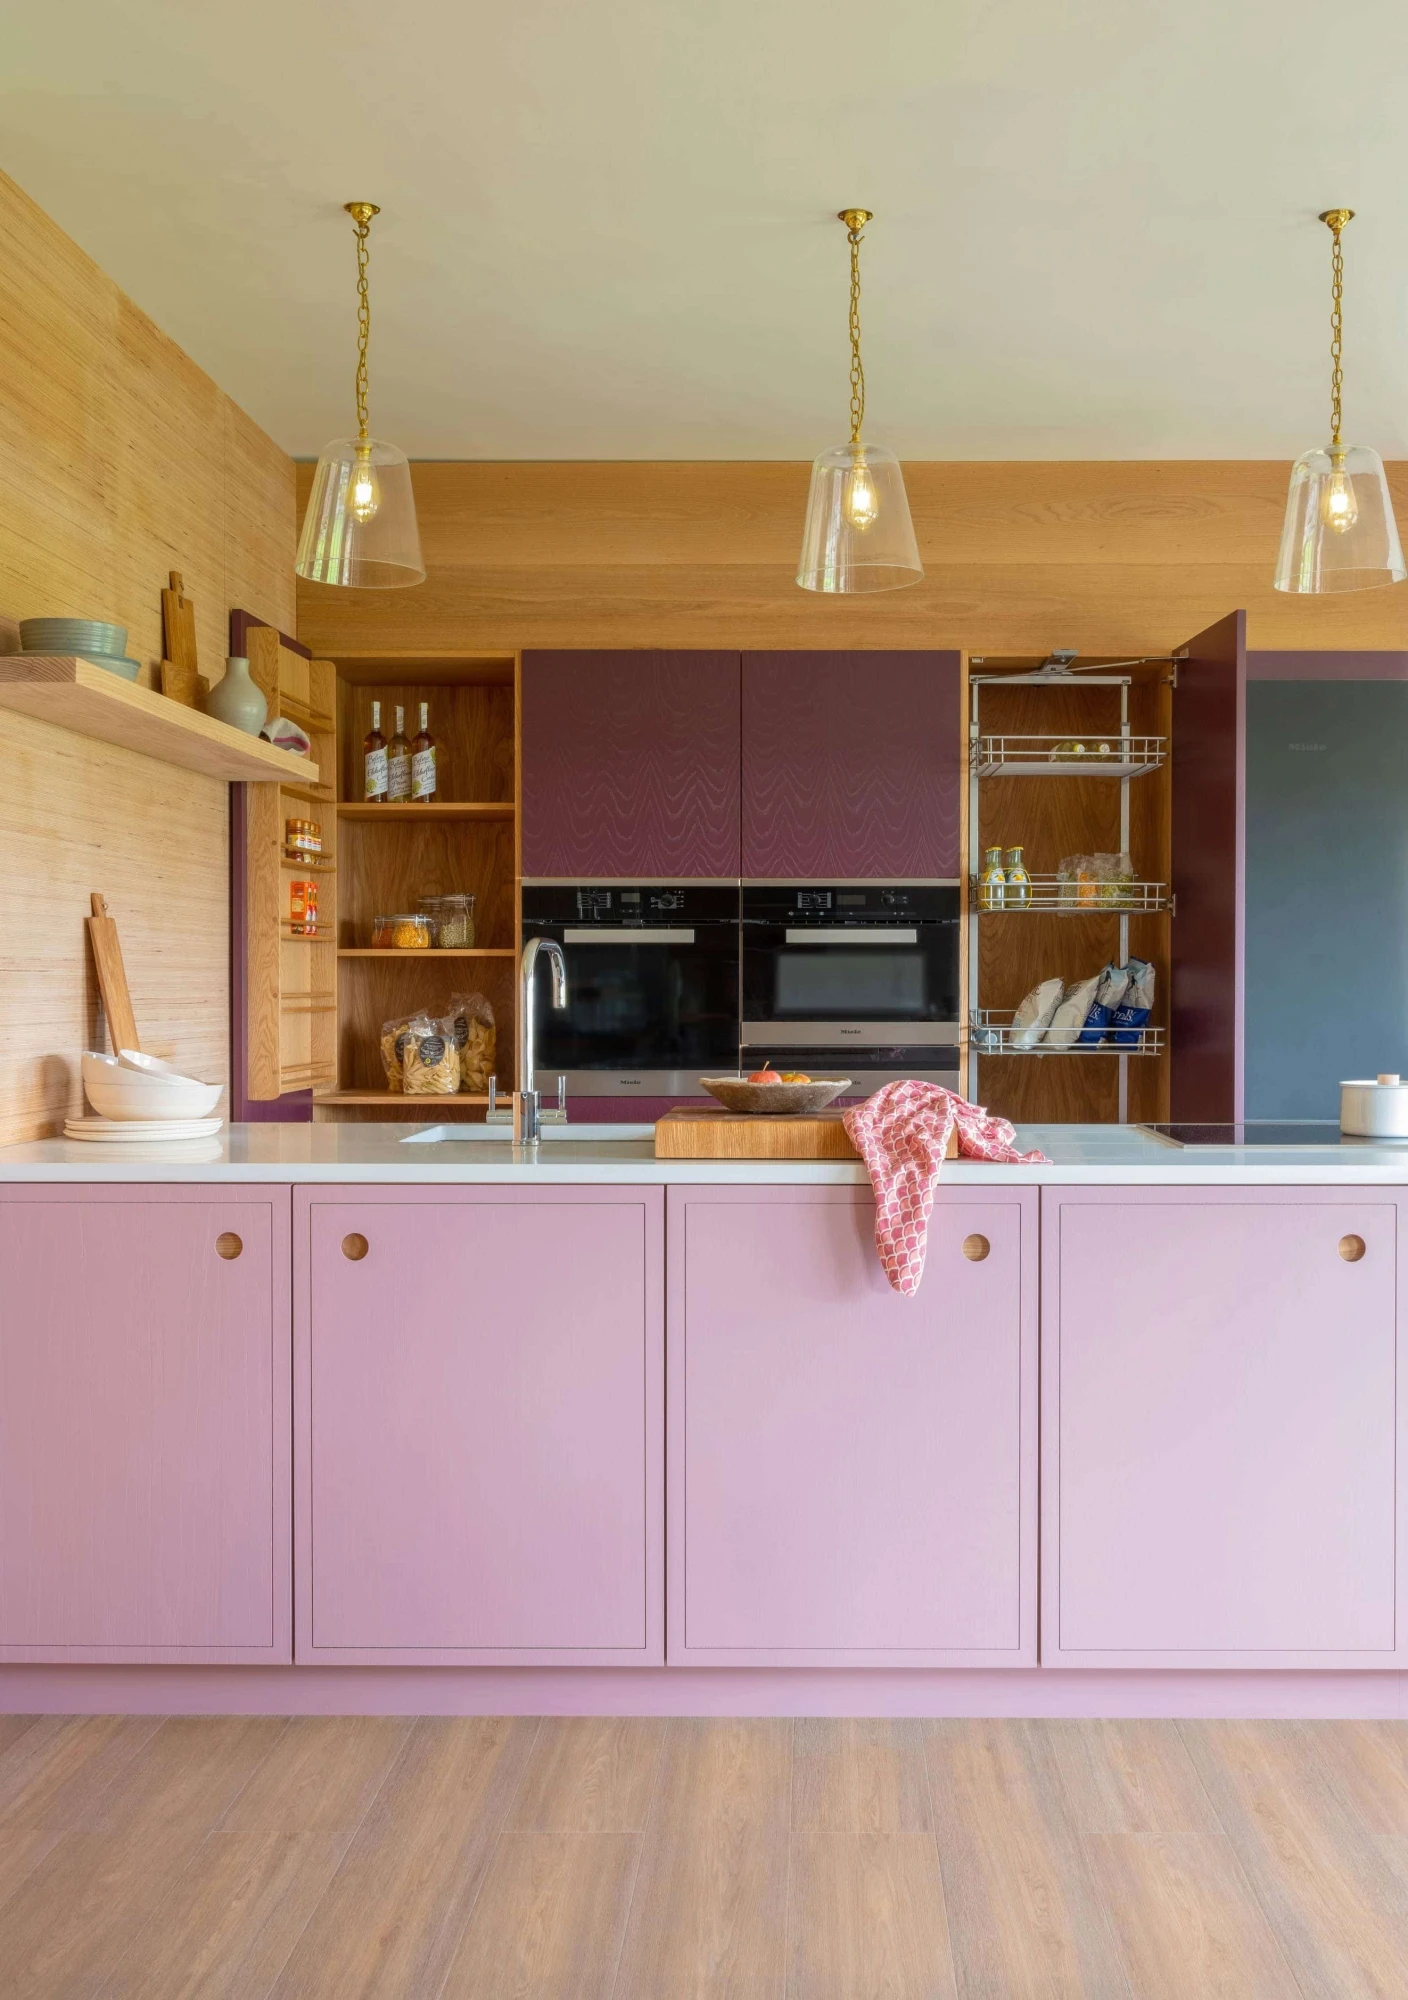 Oak ply wall paneling echoes the symmetry of the Ladbroke handle detailing, adding warmth & natural texture to the vibrant pink & purple kitchen.